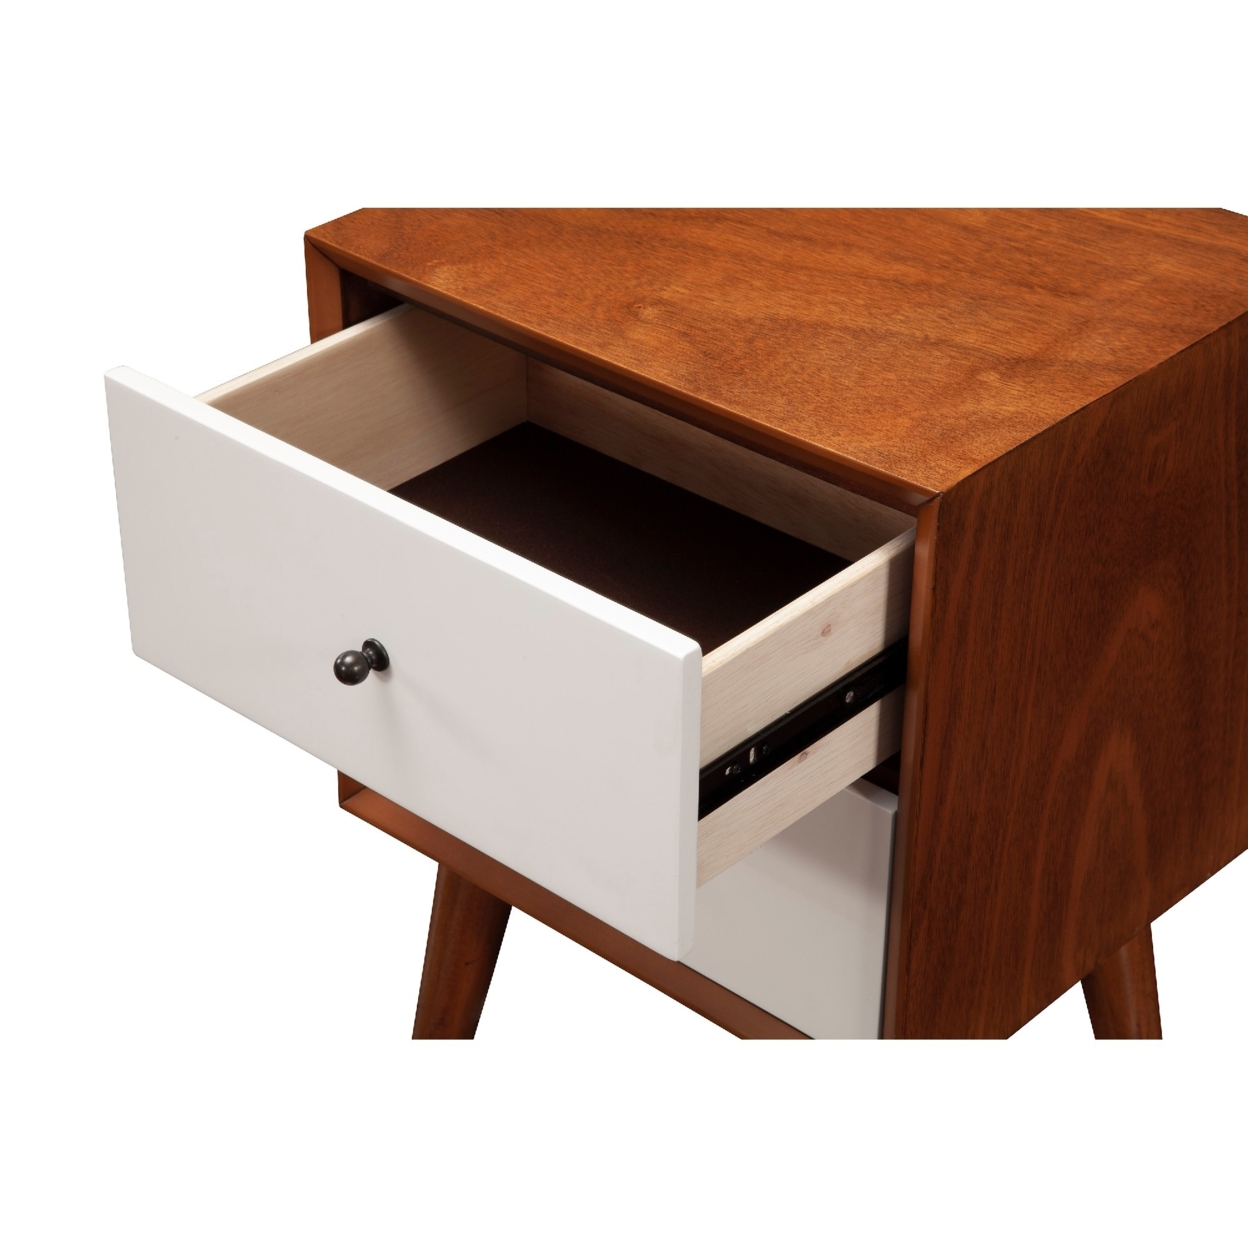 Stylish Wooden Nightstand With Two Drawers And Flared Legs, Brown And White- Saltoro Sherpi